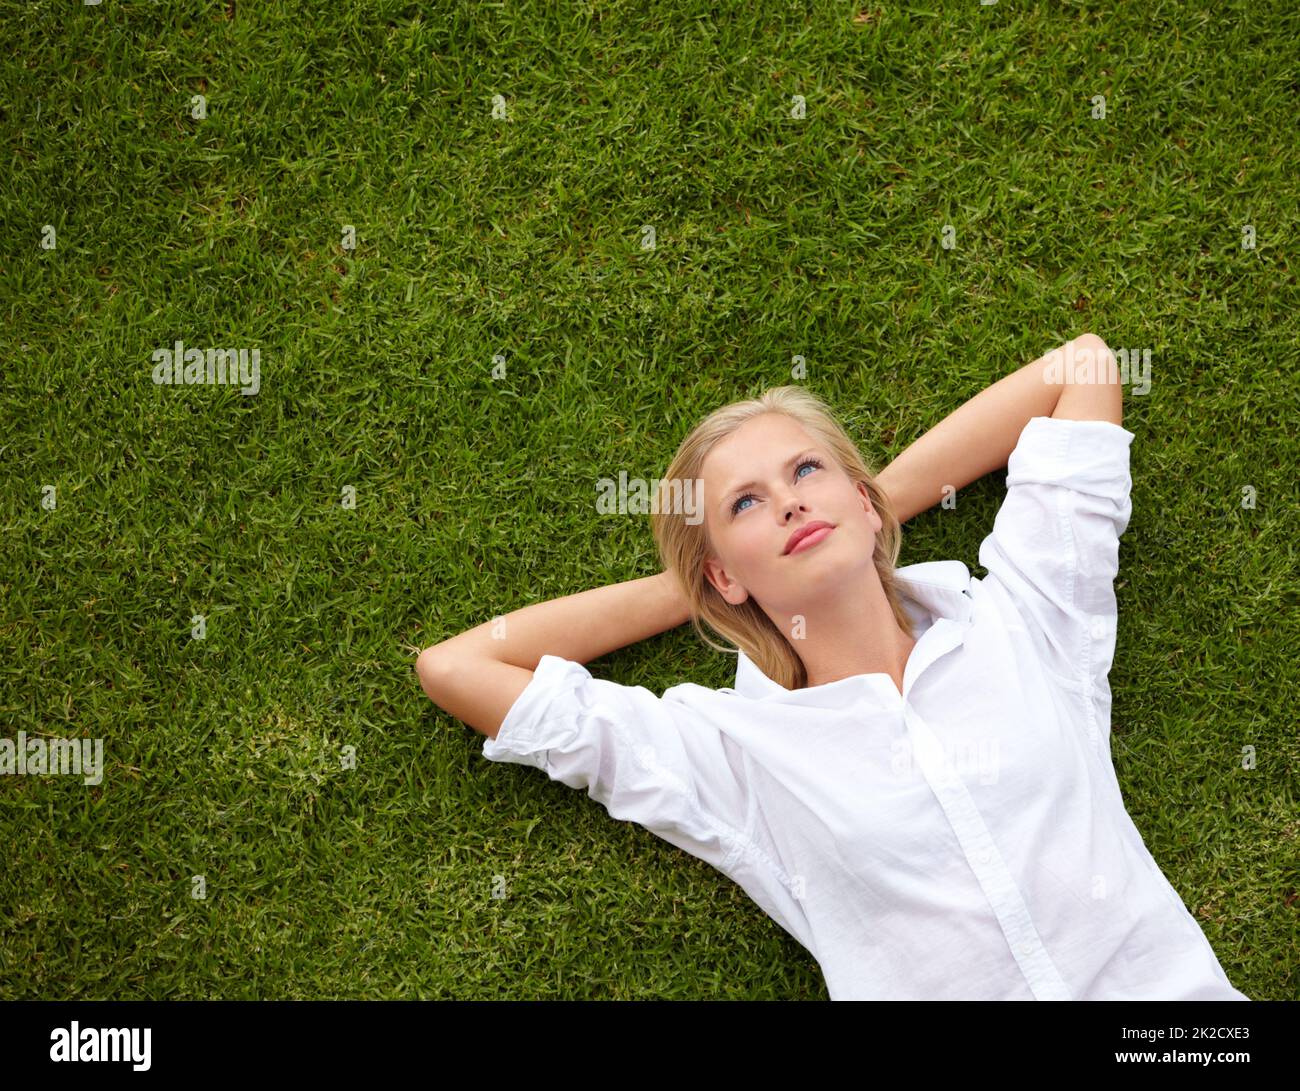 So much to ponder.... High angle shot of an attractive young woman relaxing on a grassy field and looking up at the sky. Stock Photo